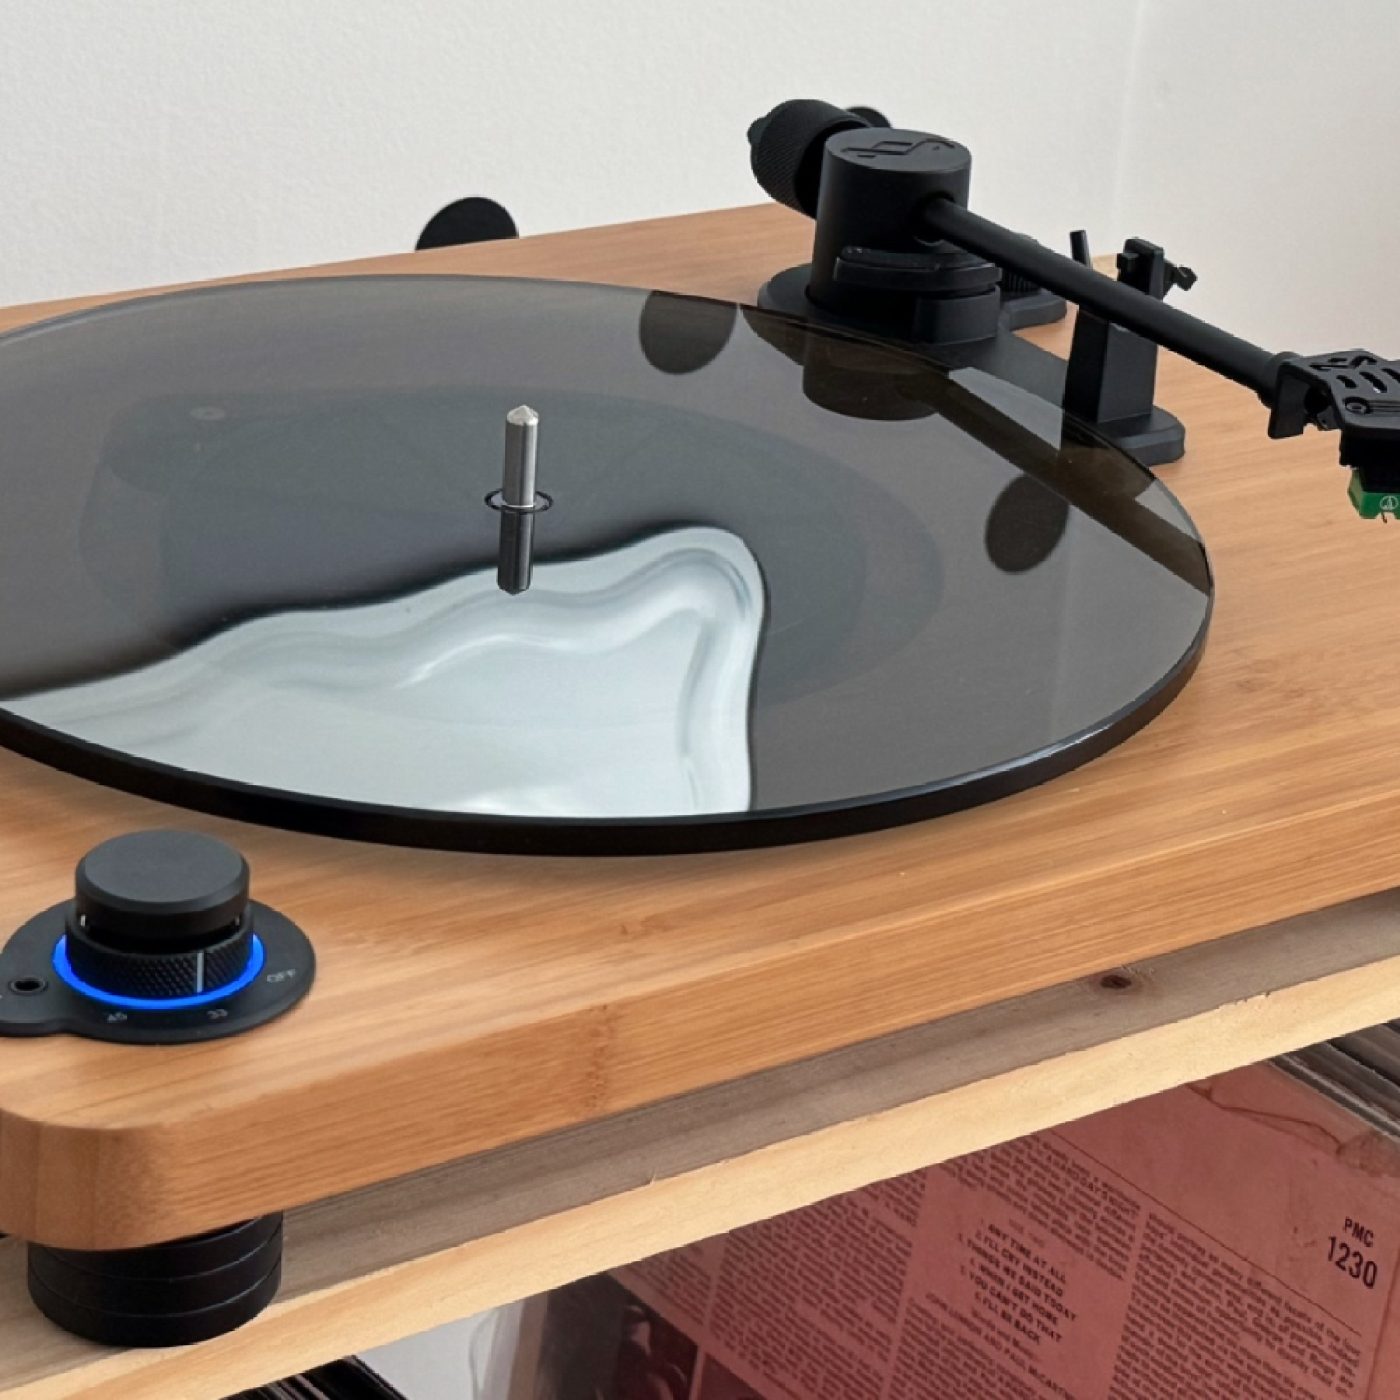 House of Marley Stir it Up wireless turntable review - Great